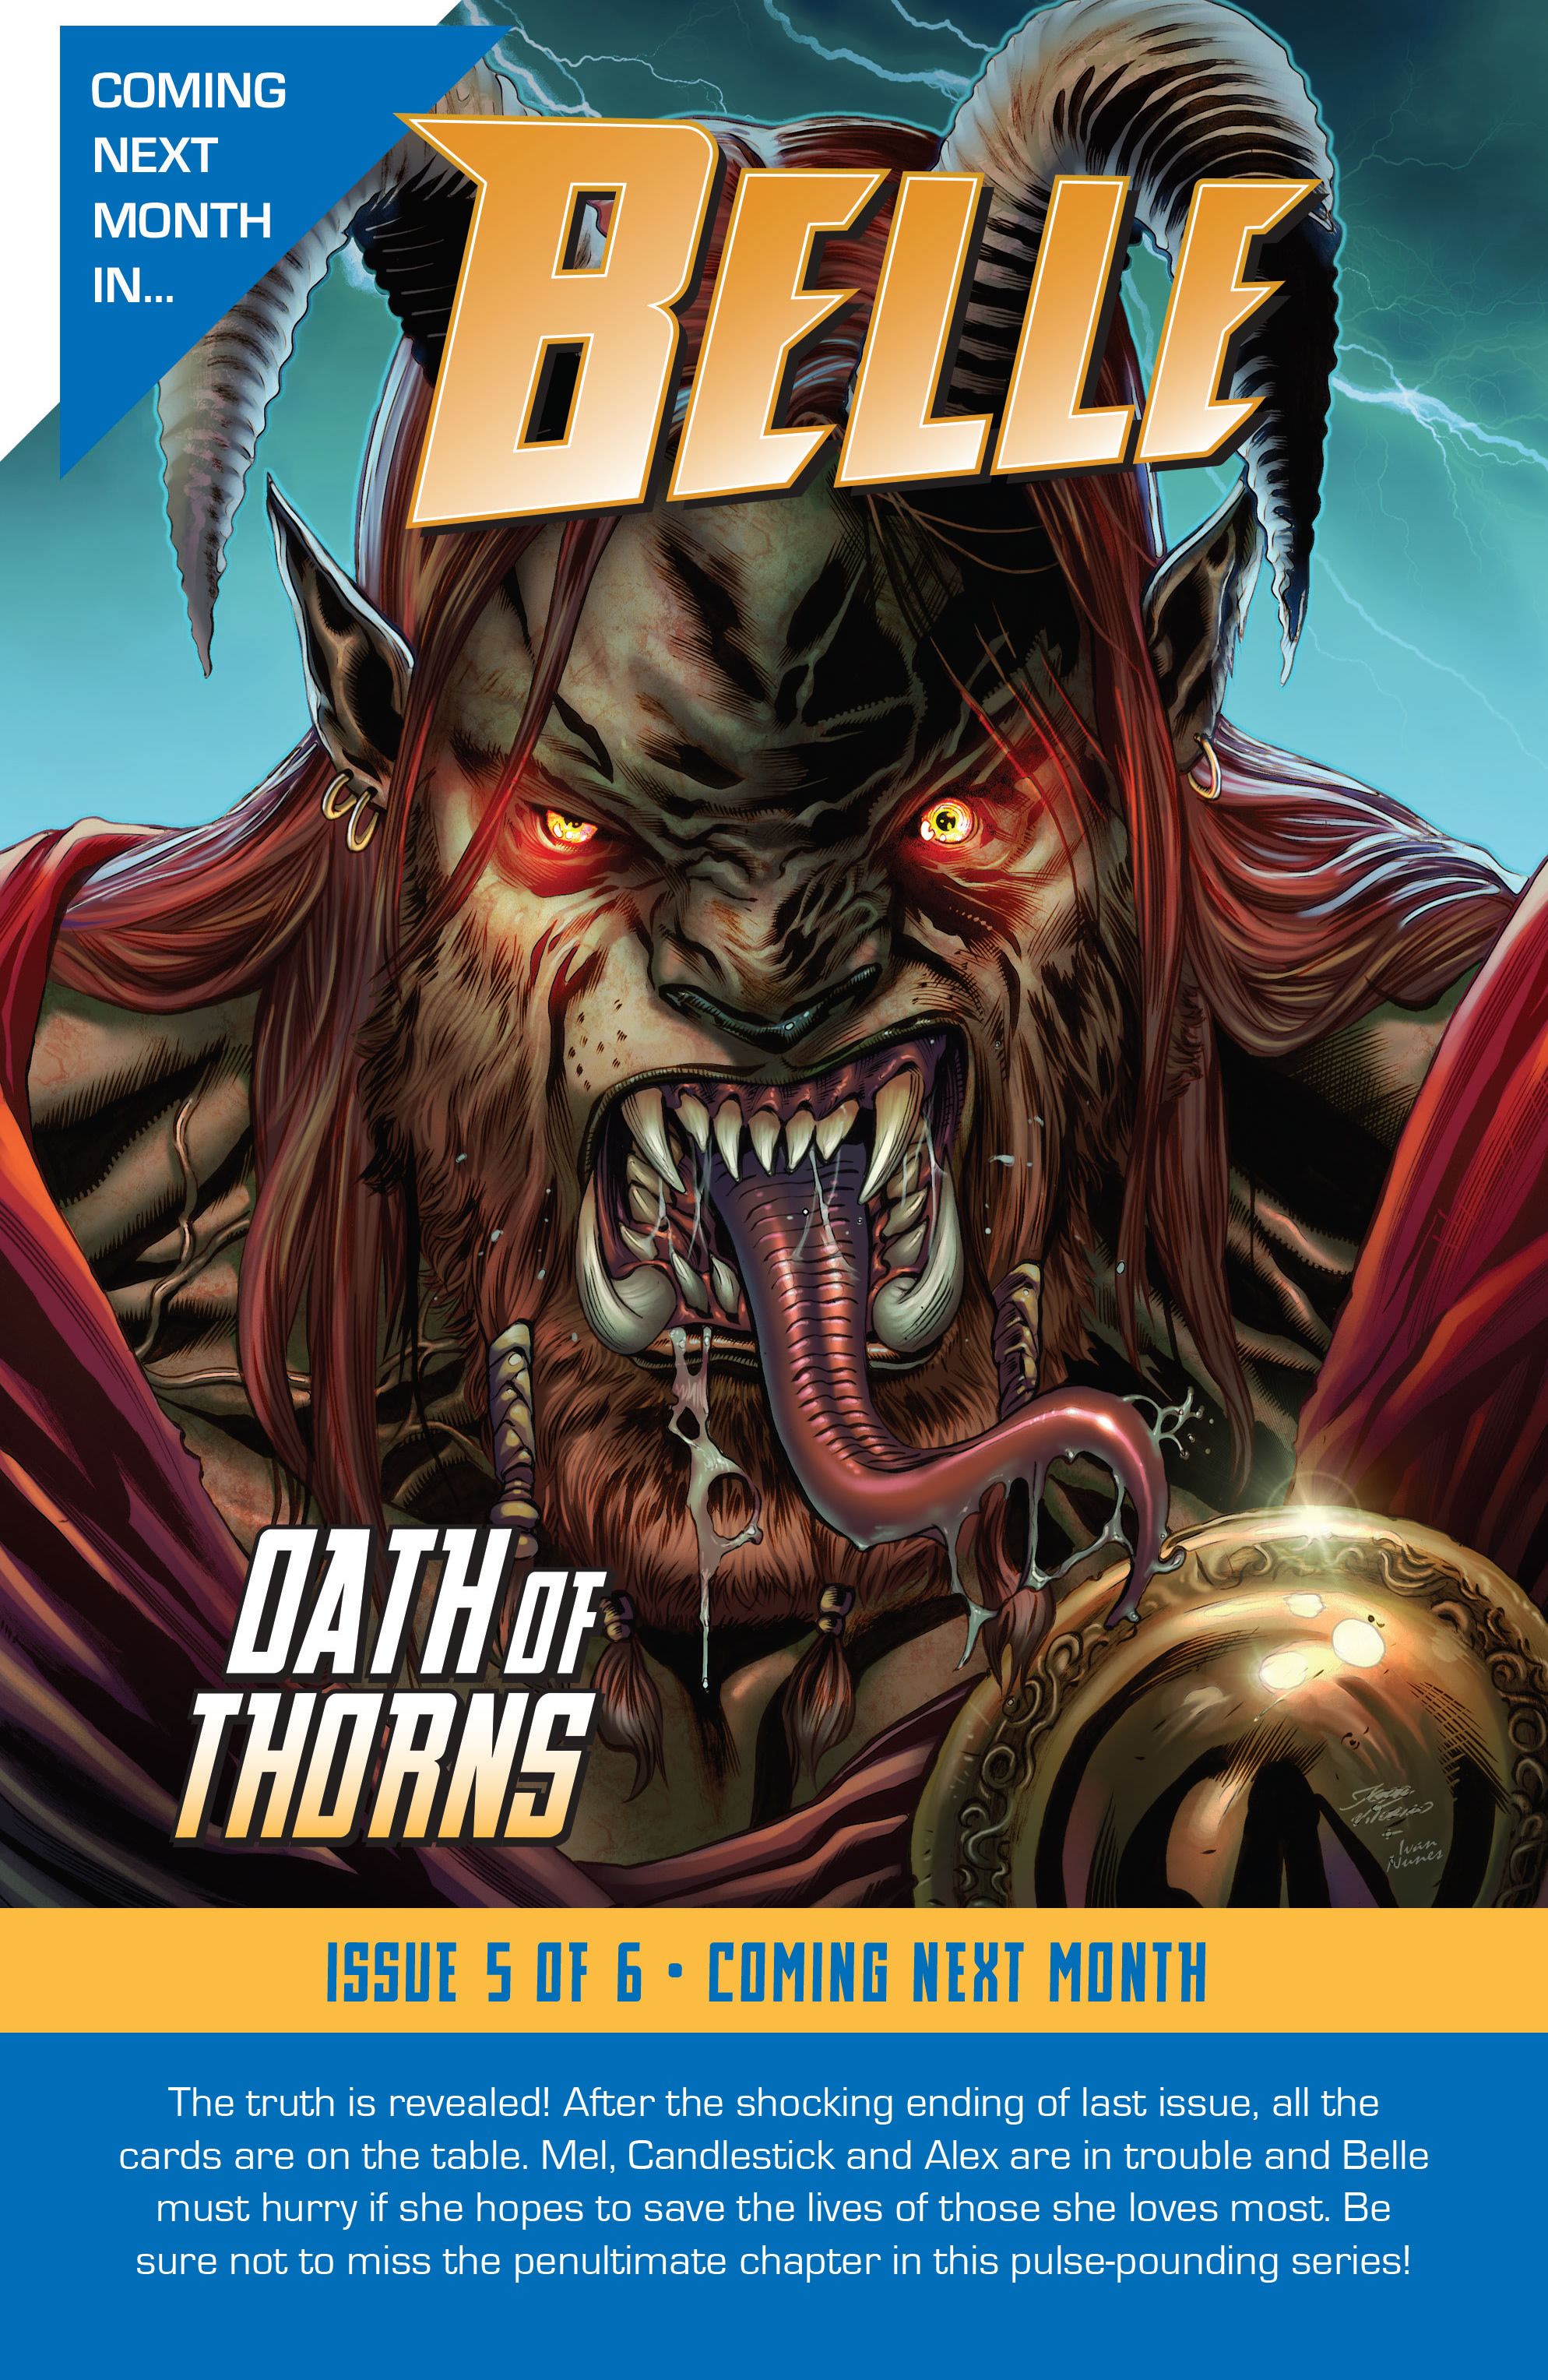 Read online Belle: Oath of Thorns comic -  Issue #4 - 25